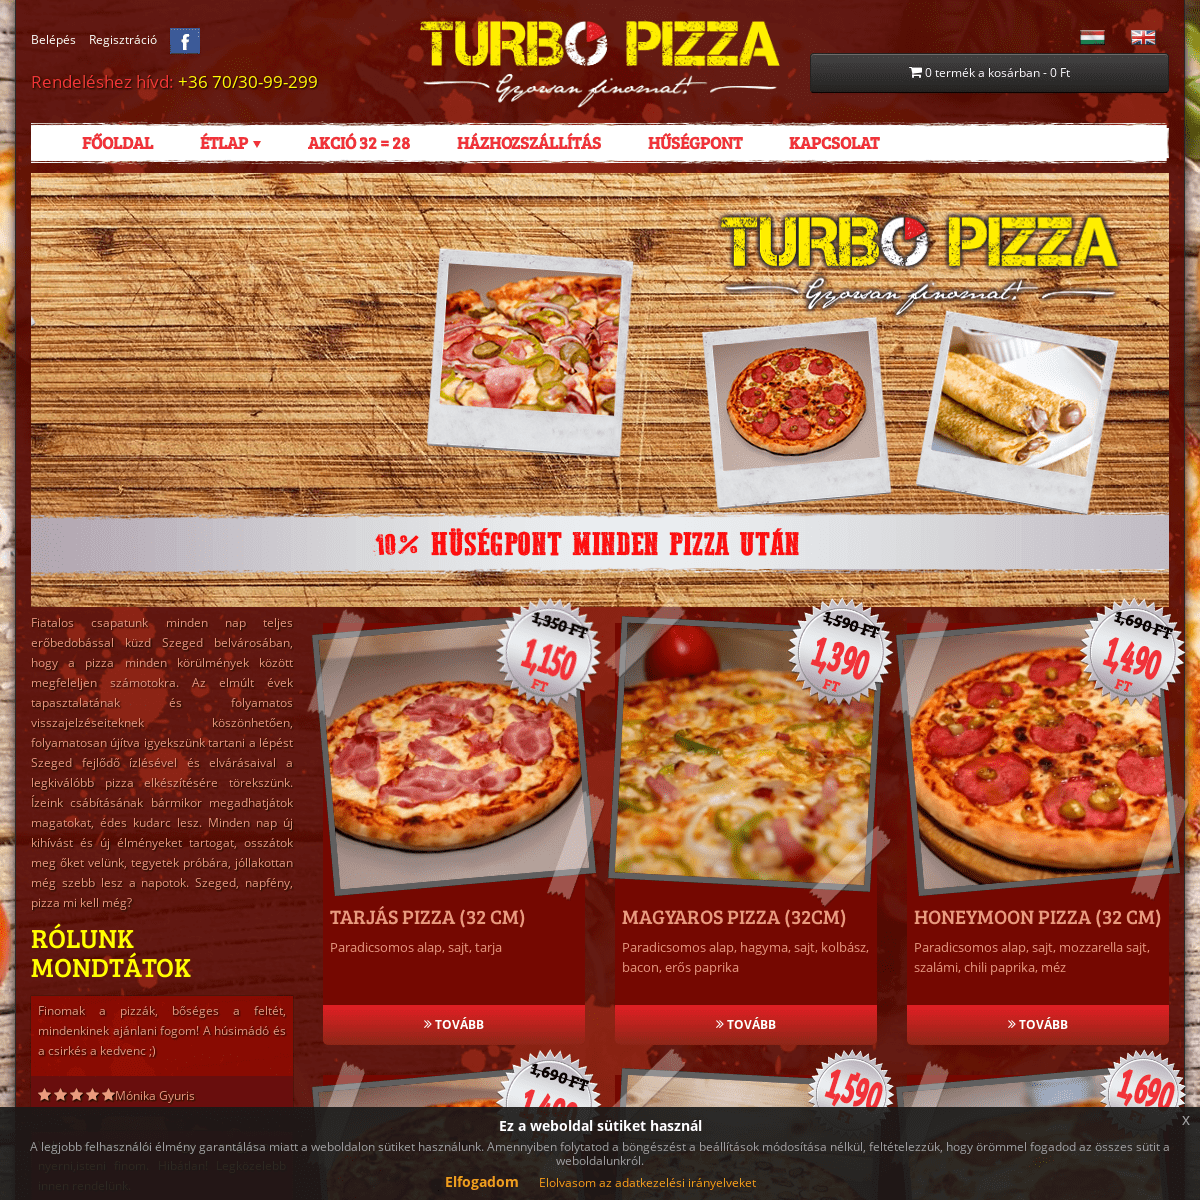 A complete backup of turbopizza.hu